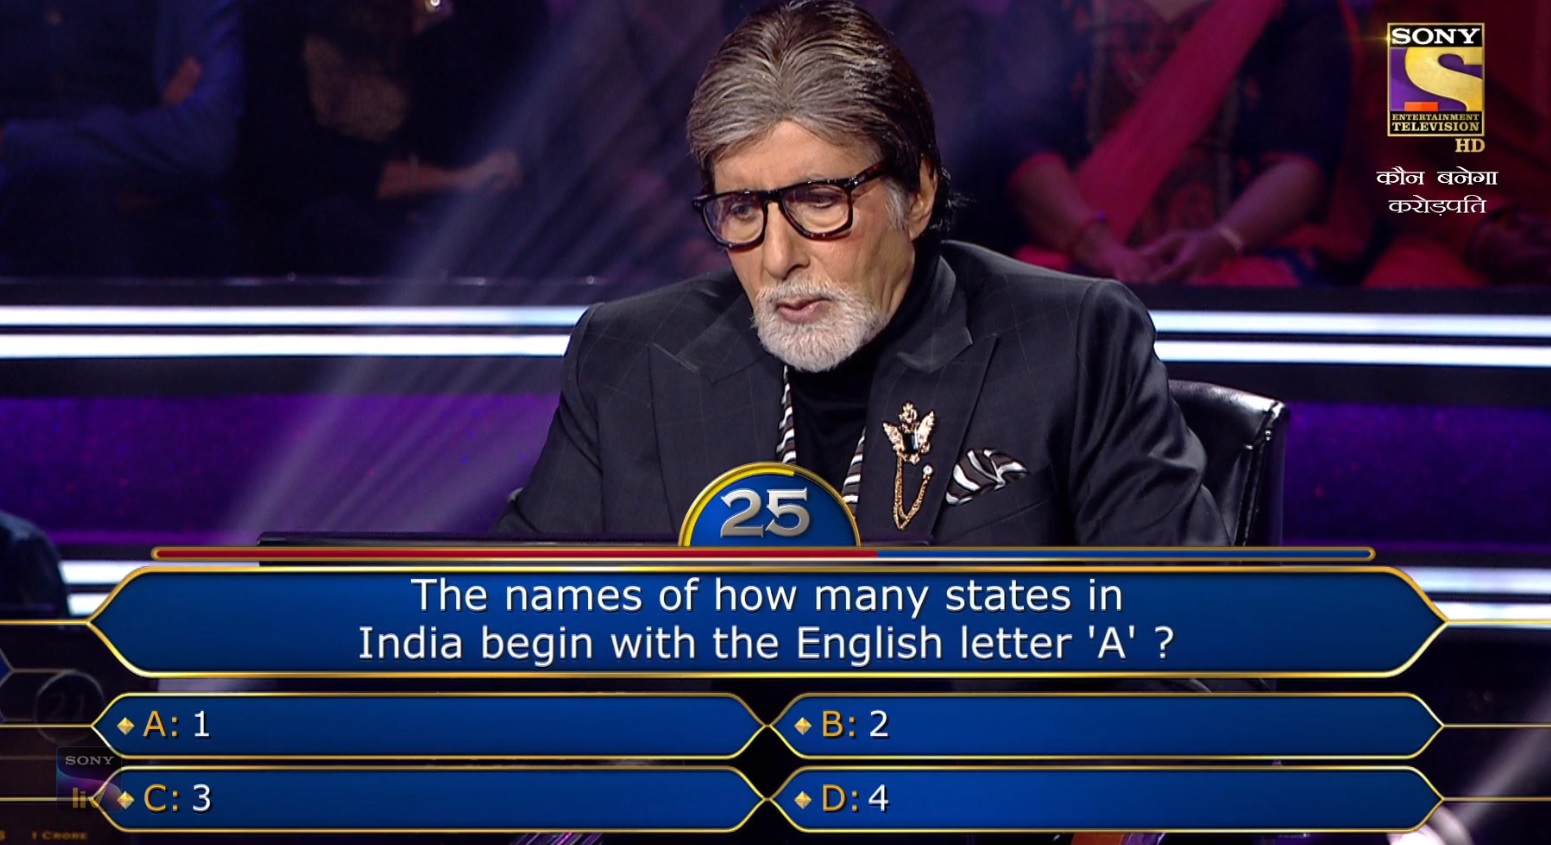 Ques : The names of how many states in India begin with the English letter ‘A’?